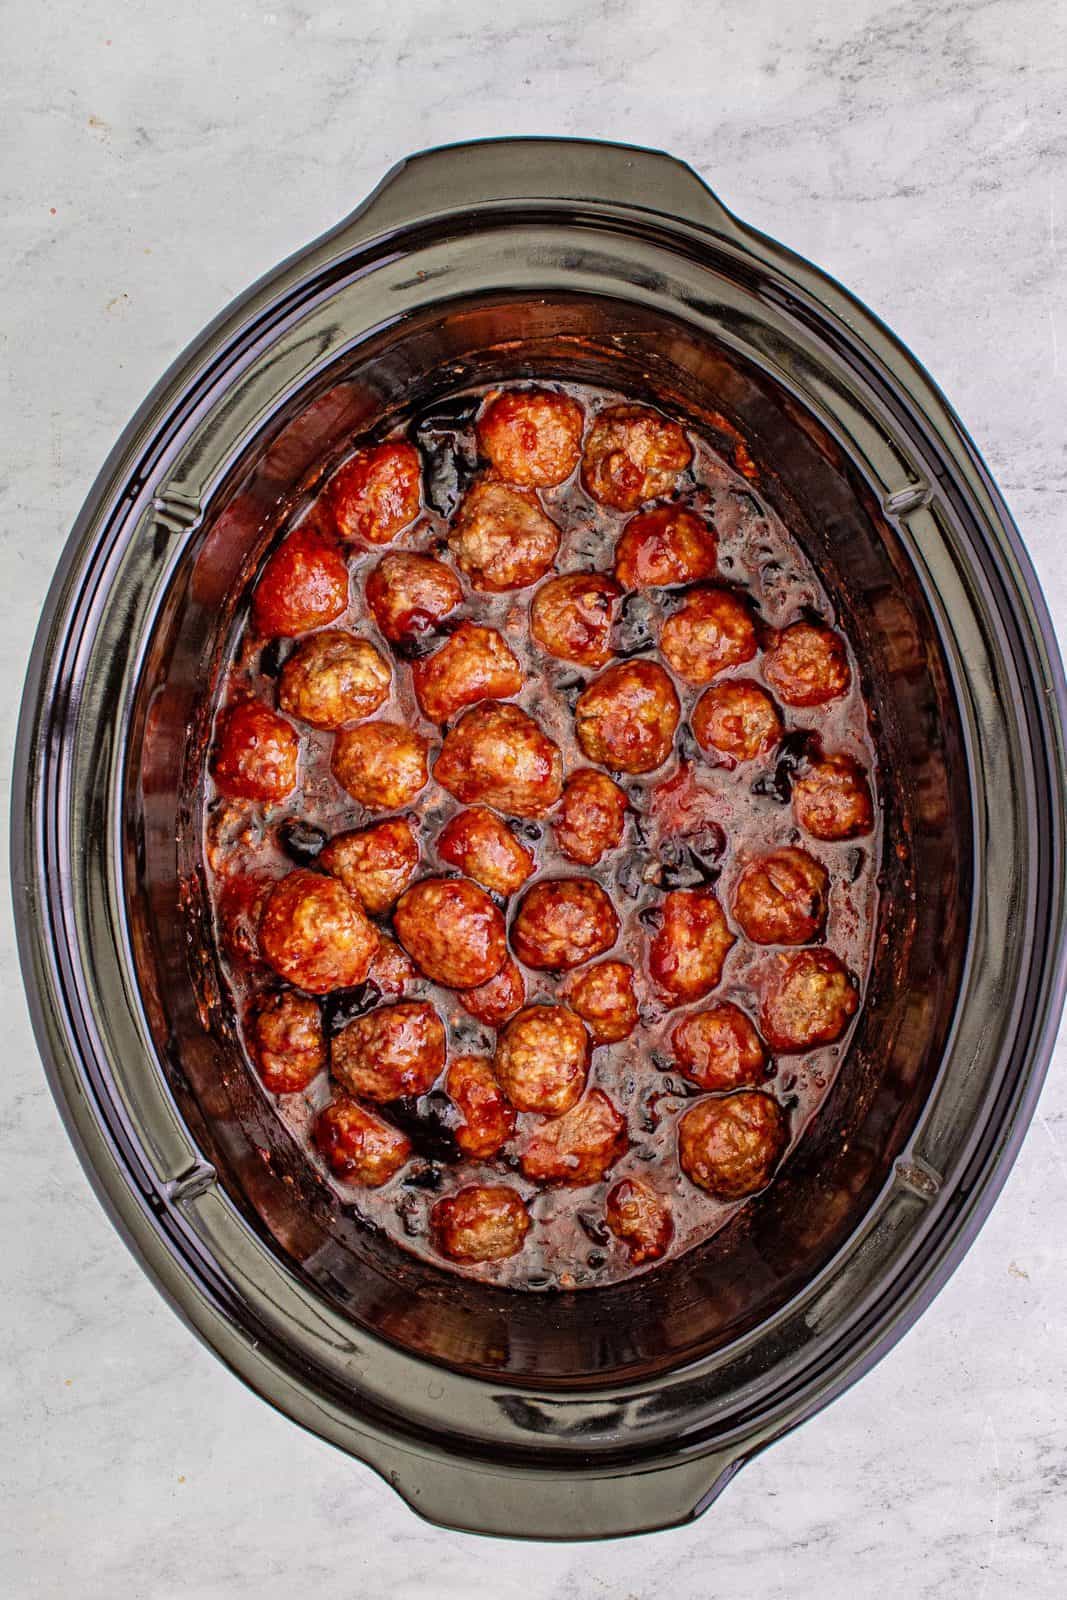 Grape jelly and chili sauce added to crock pot and mixed together with meatballs.